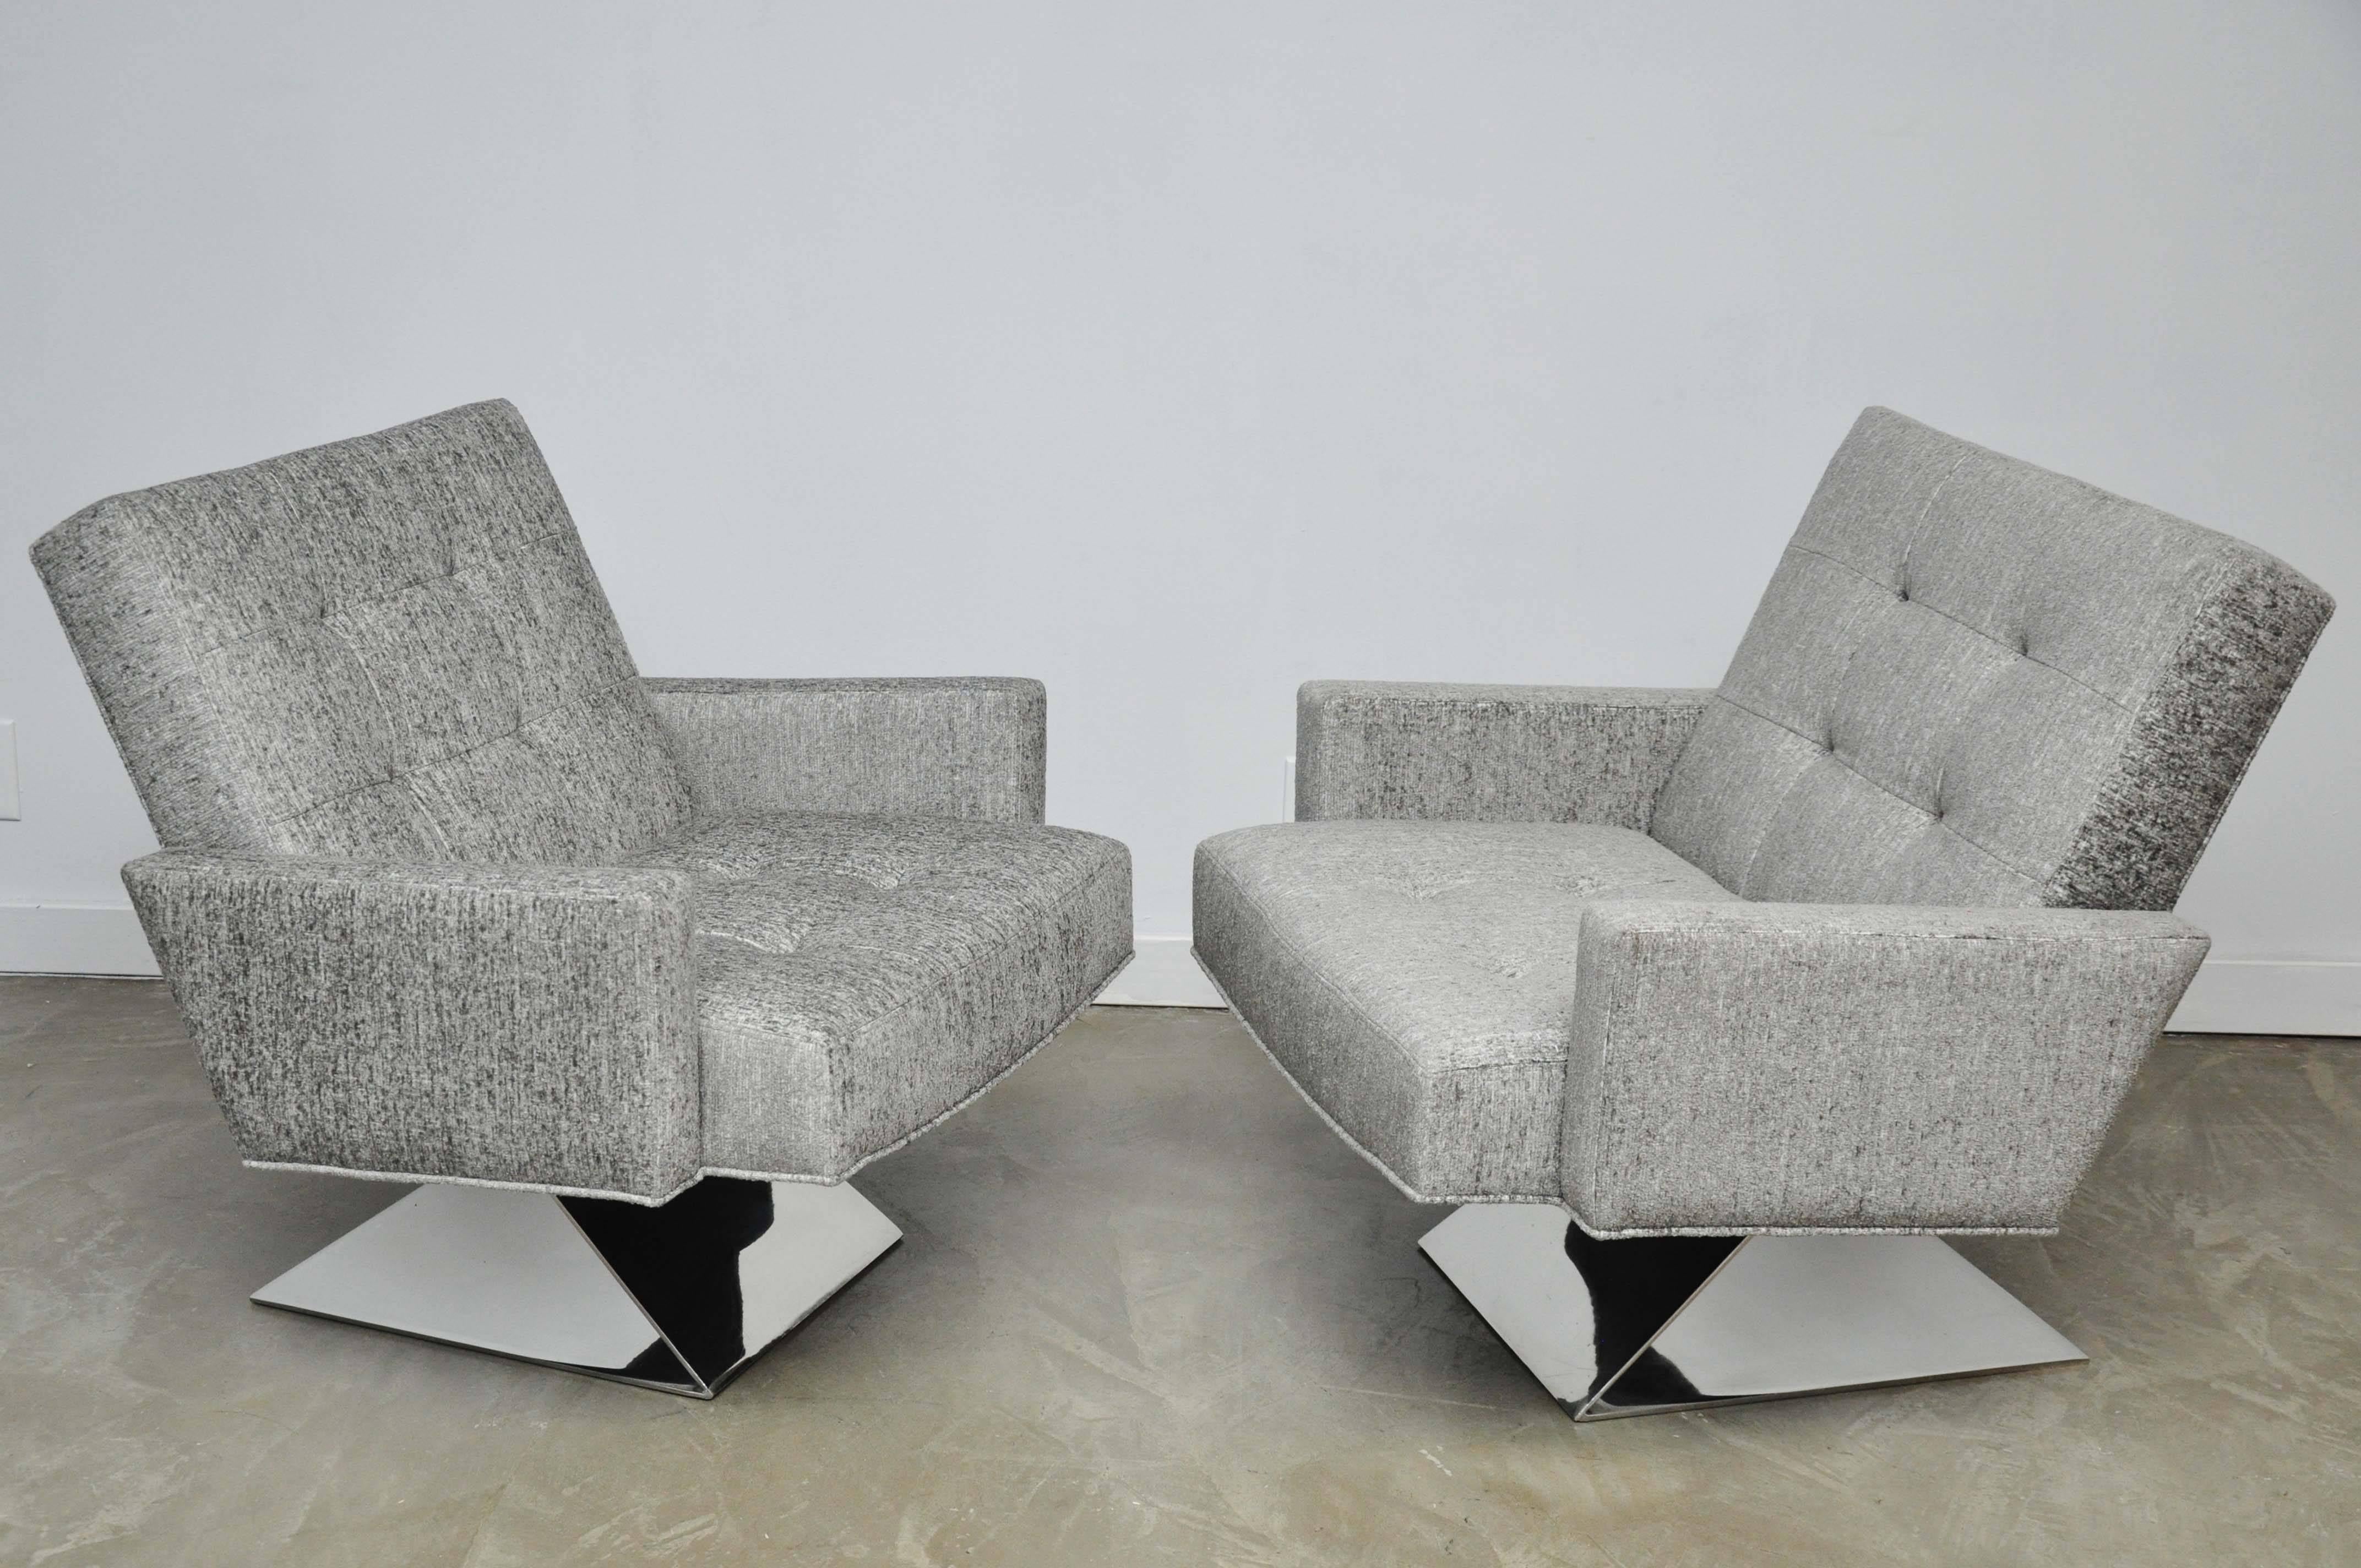 Rare cantilever base lounge chairs by Milo Baughman. Solid stainless steel chrome bases. Fully restored. Newly upholstered. One of Milo Baughman's finest designs!